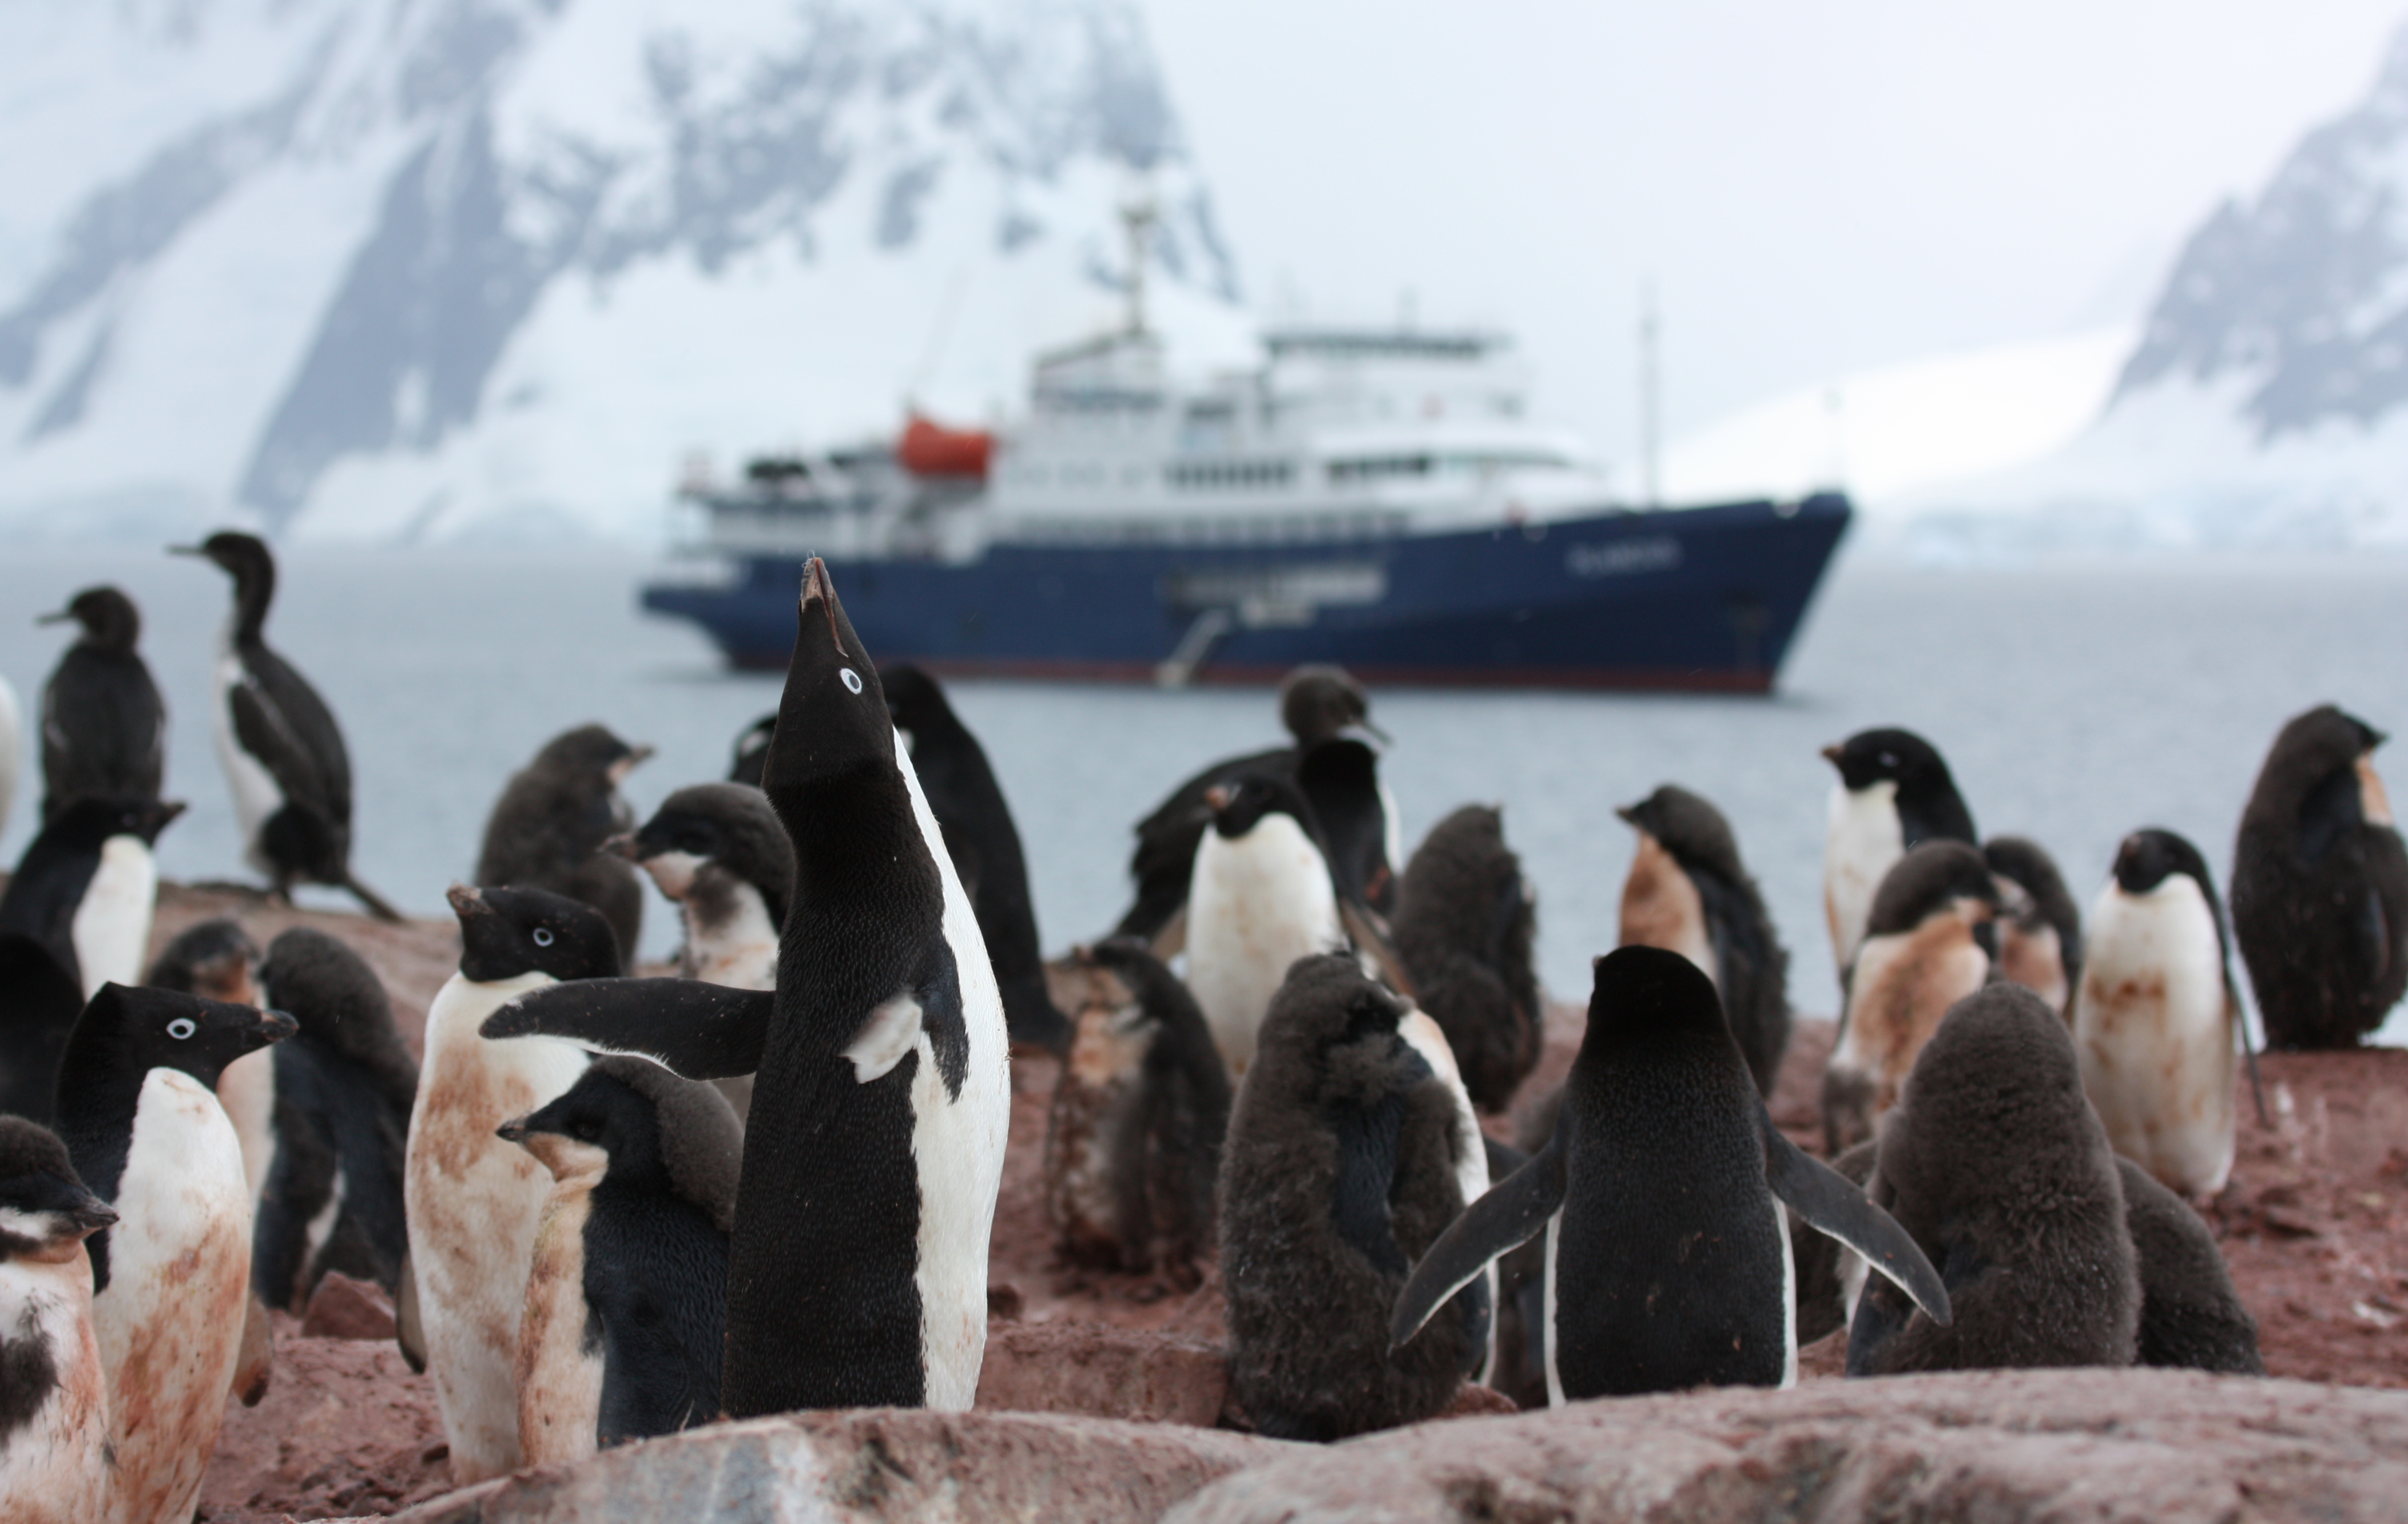 Group of penguins, behind a ship